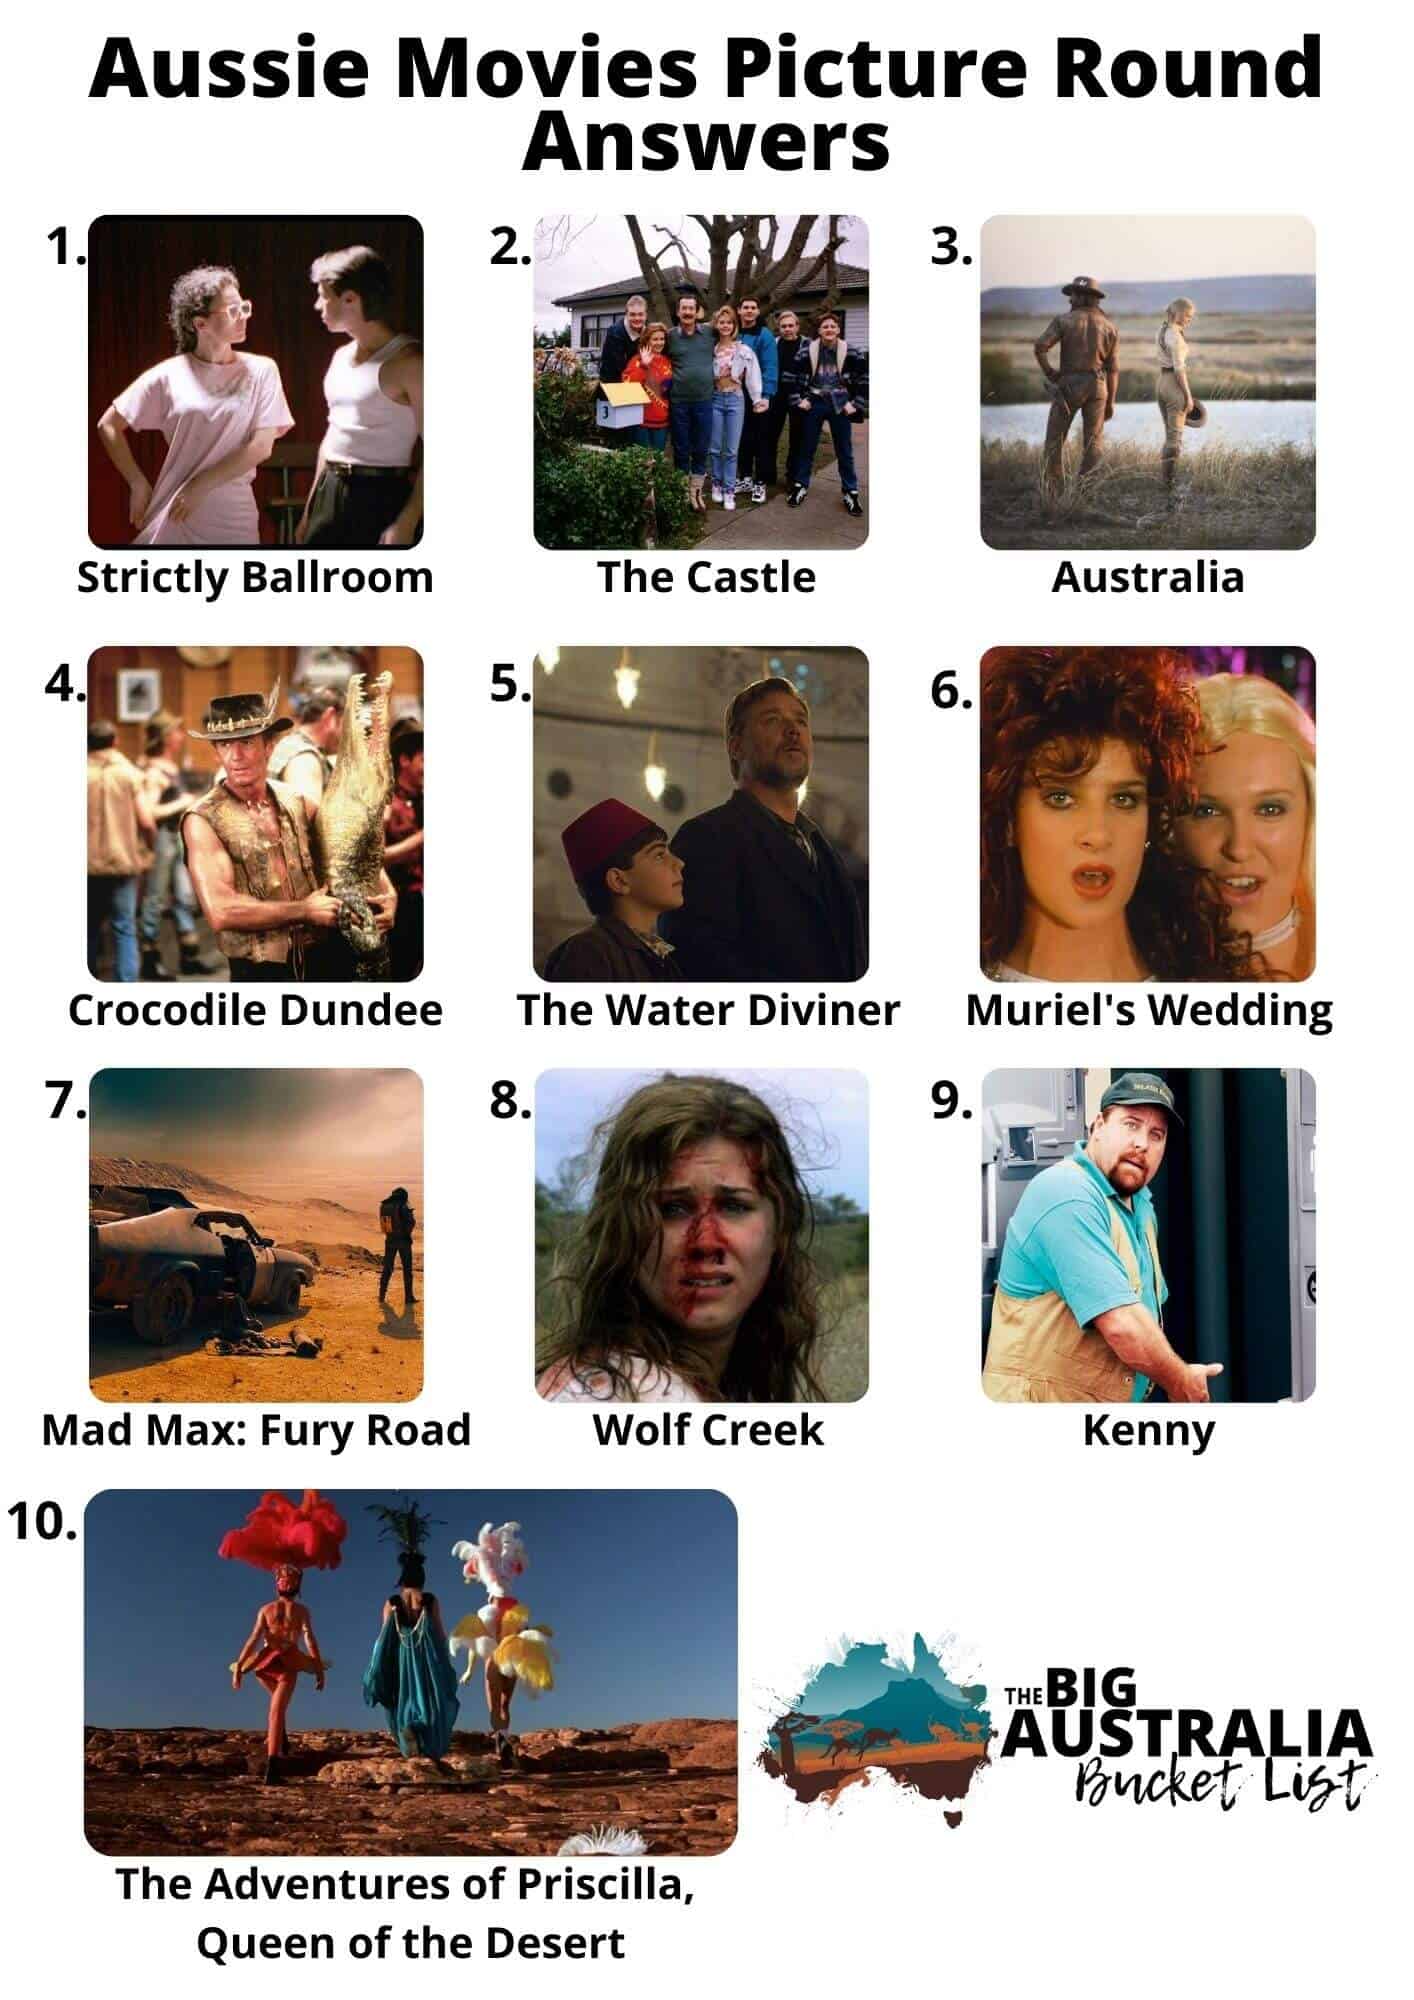 Big Australia Quiz - Aussie Movies Picture Round featuring 10 screengrabs of Australian movies with the titles underneath